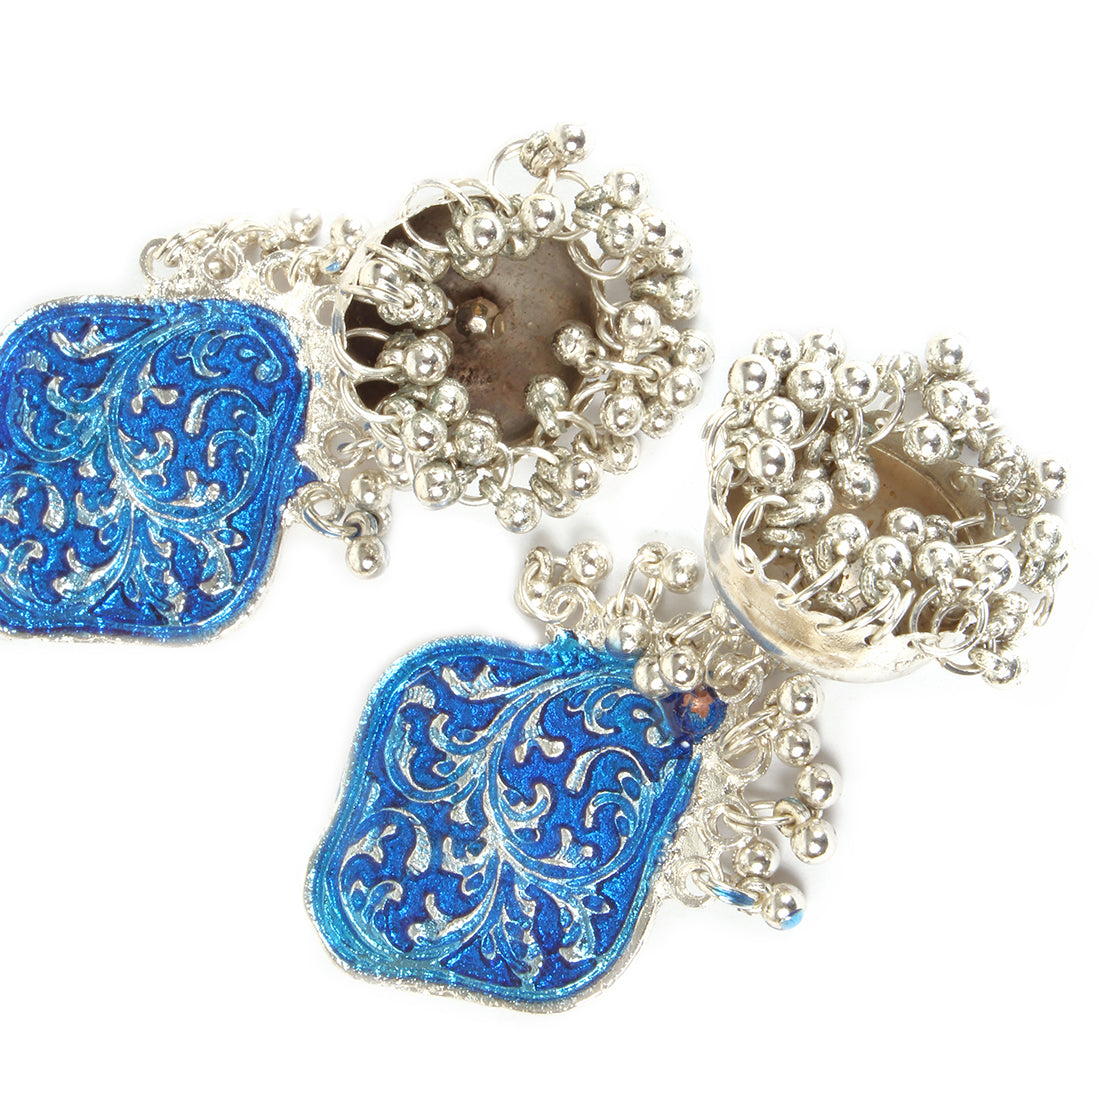 OVERSIZED HANDCRAFTED ETHNIC SILVER-TONED BLUE ACRYLIC GHUNGROO JHUMKI DROP EARRINGS